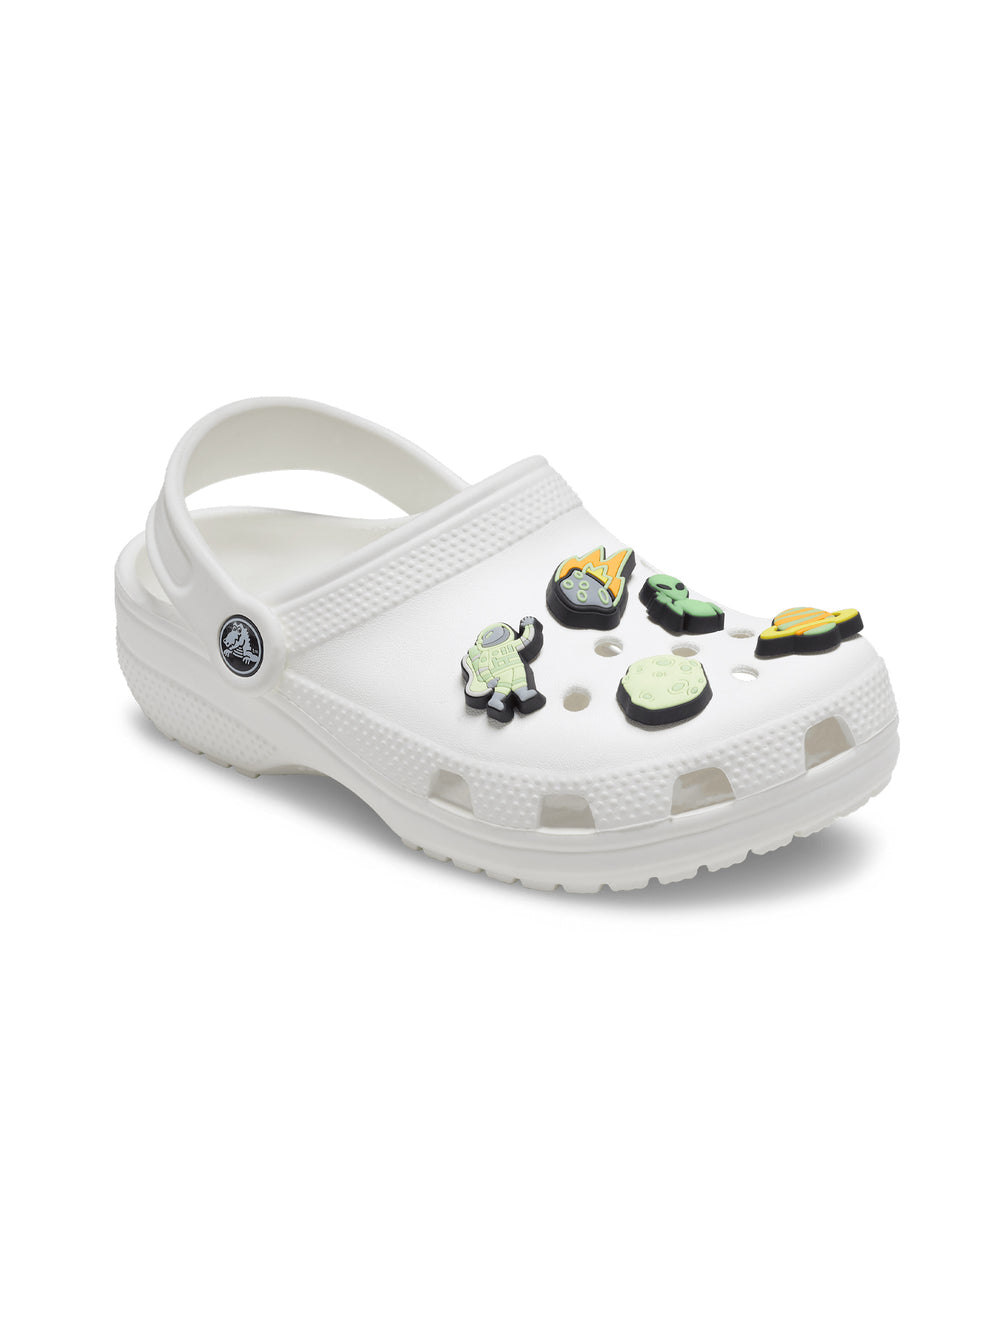 CROCS JIBBITZ OUT OF SPACE 5 PACK - CLEARANCE